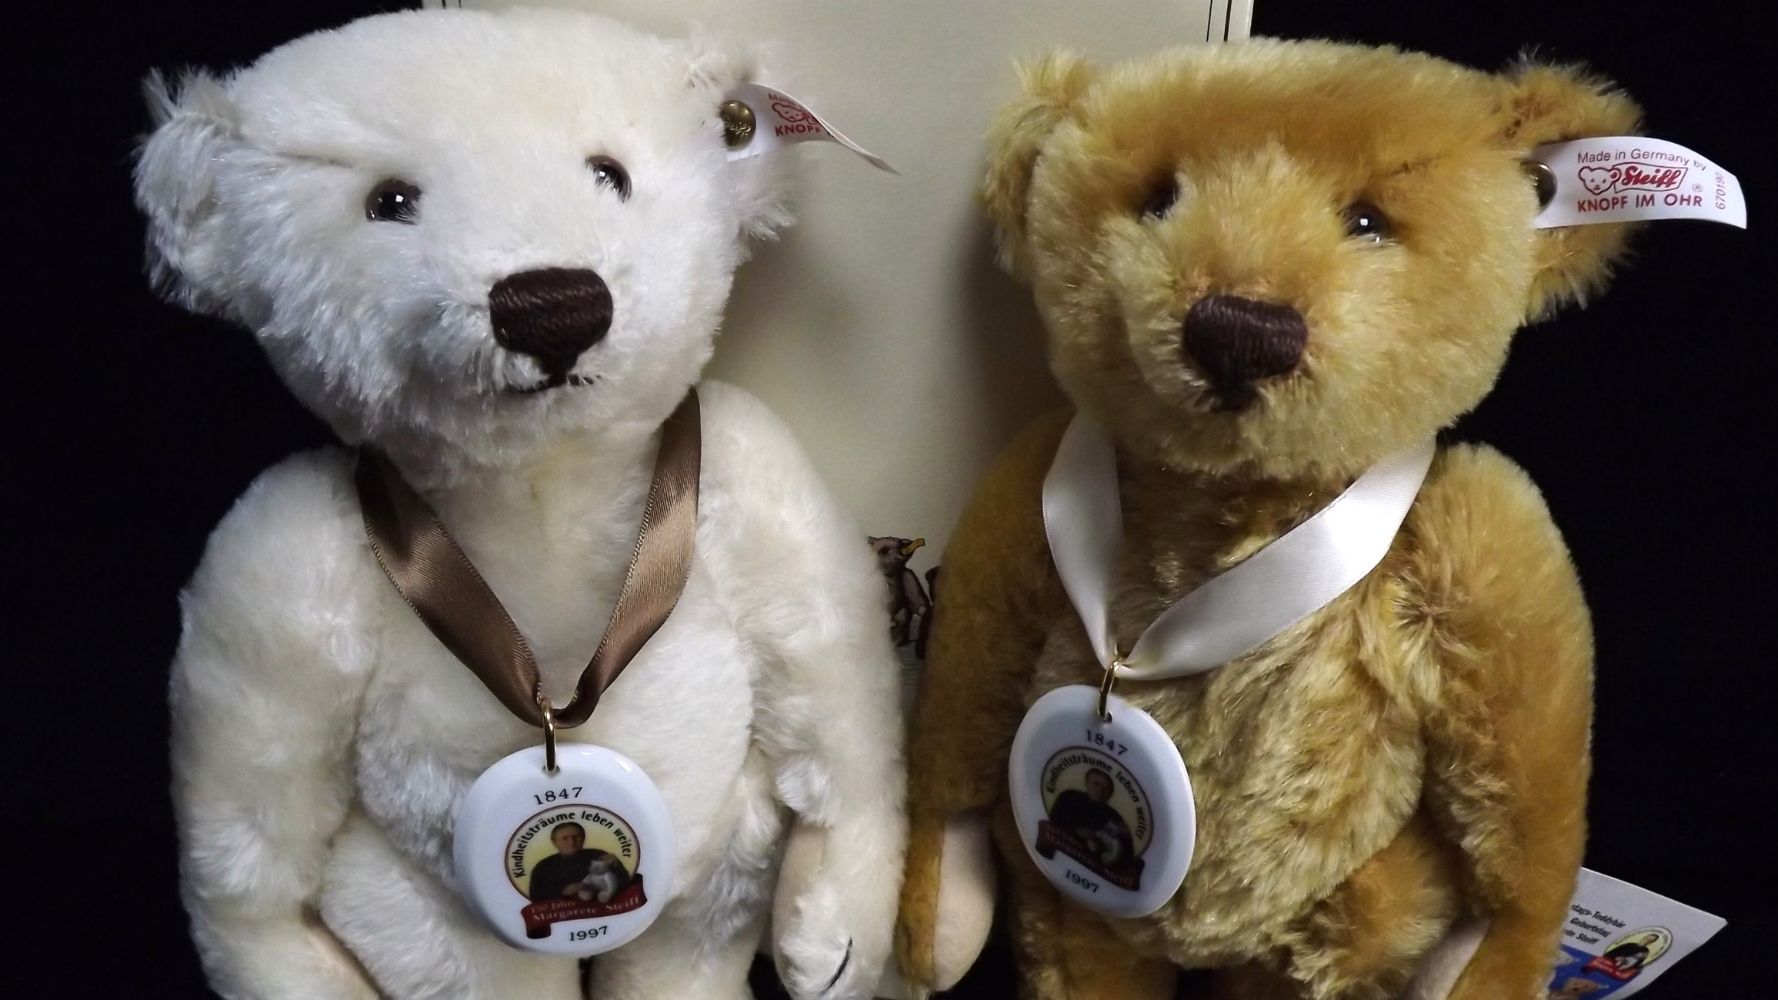 North American Hunting Decoys & Natural History, Steiff Teddy Bears, Stamps and Coins